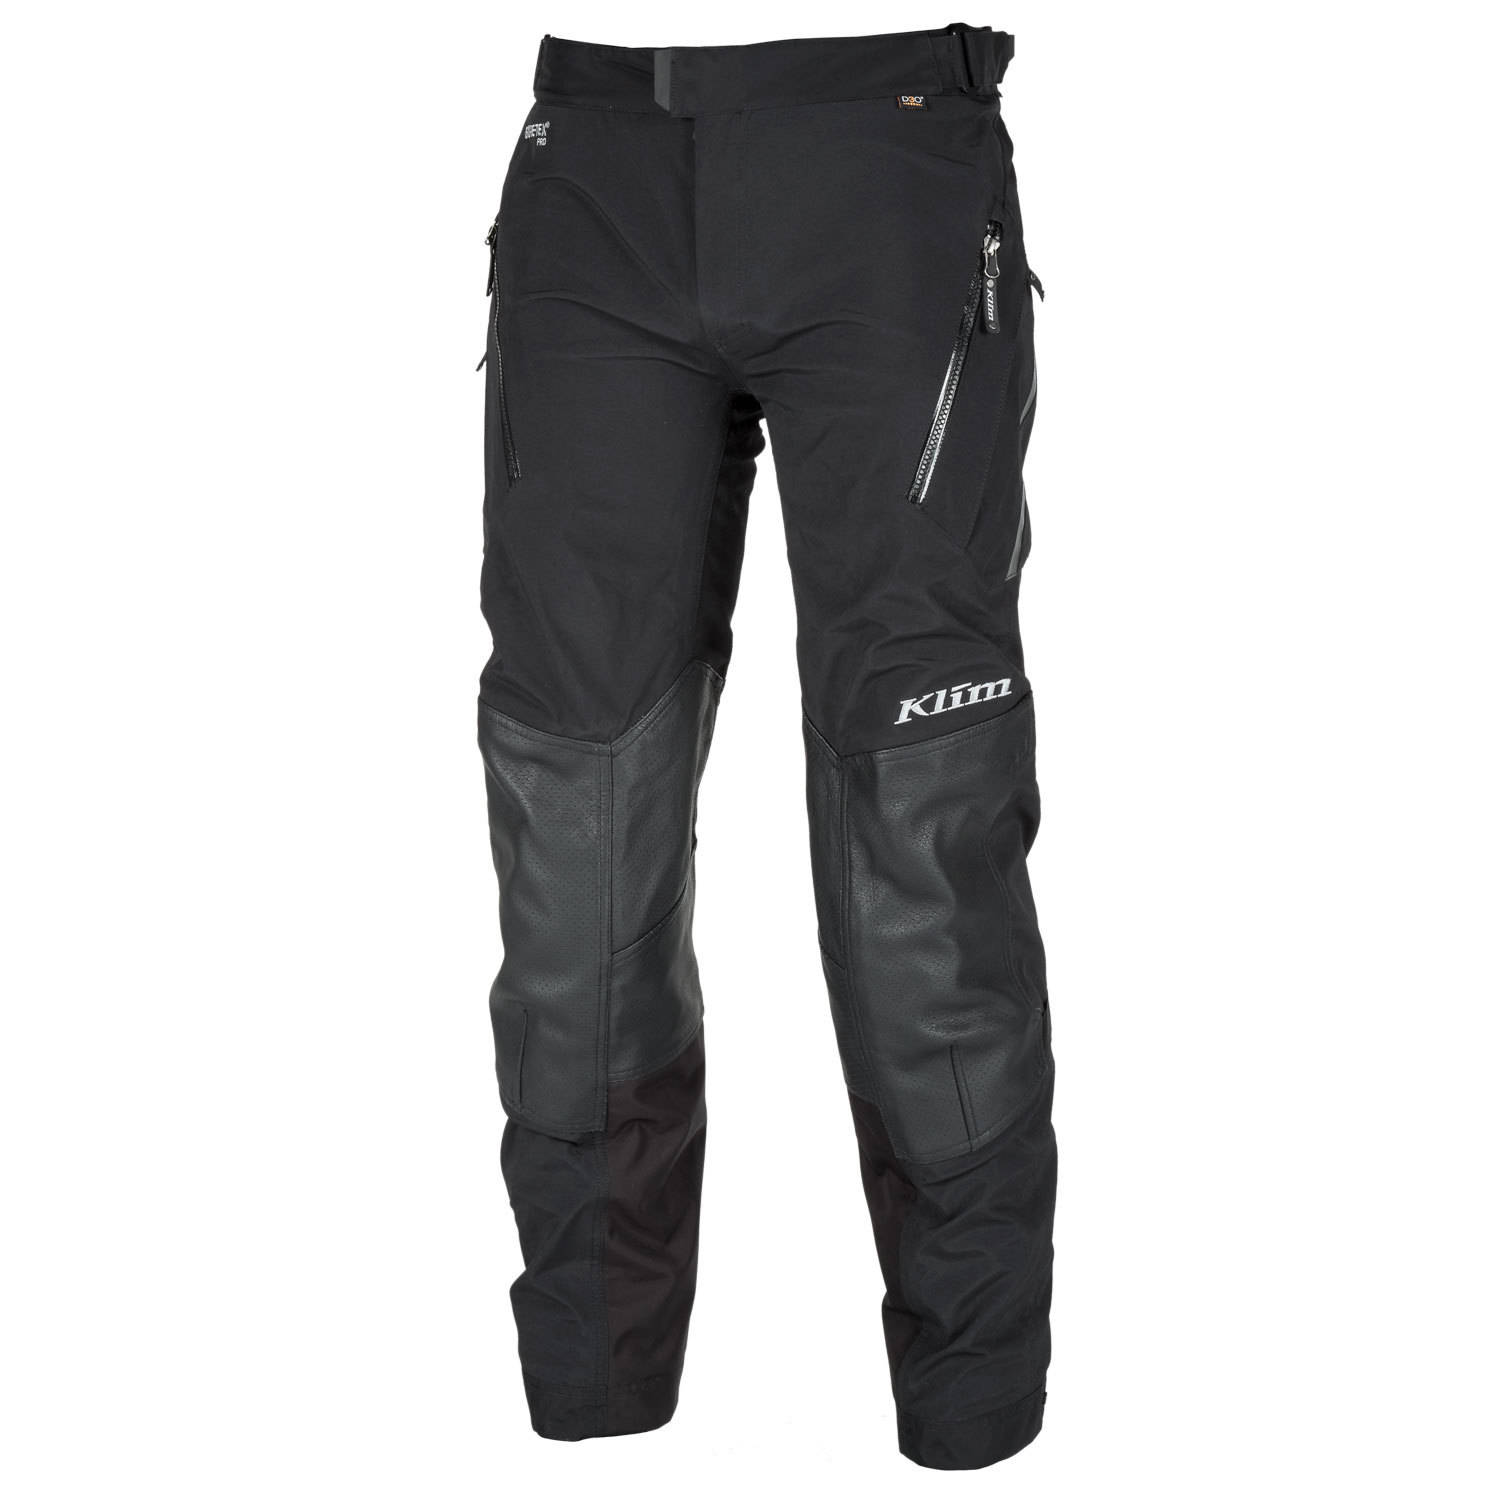 Viewing Images For Icon 1000 Varial Pants  MotorcycleGearcom